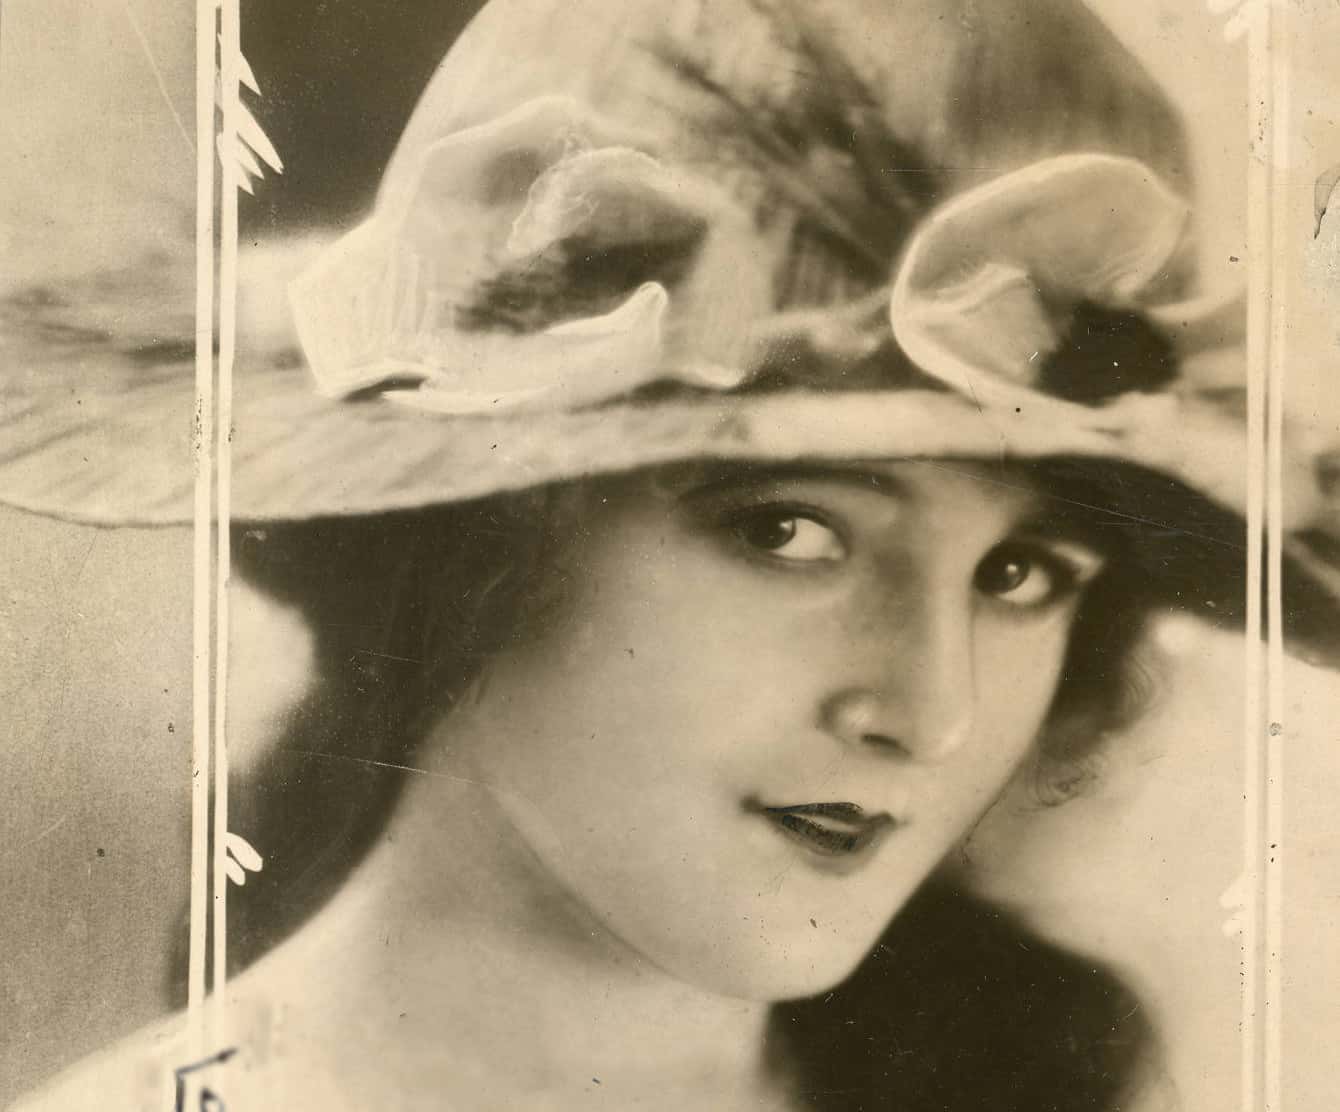 Mary Astor facts